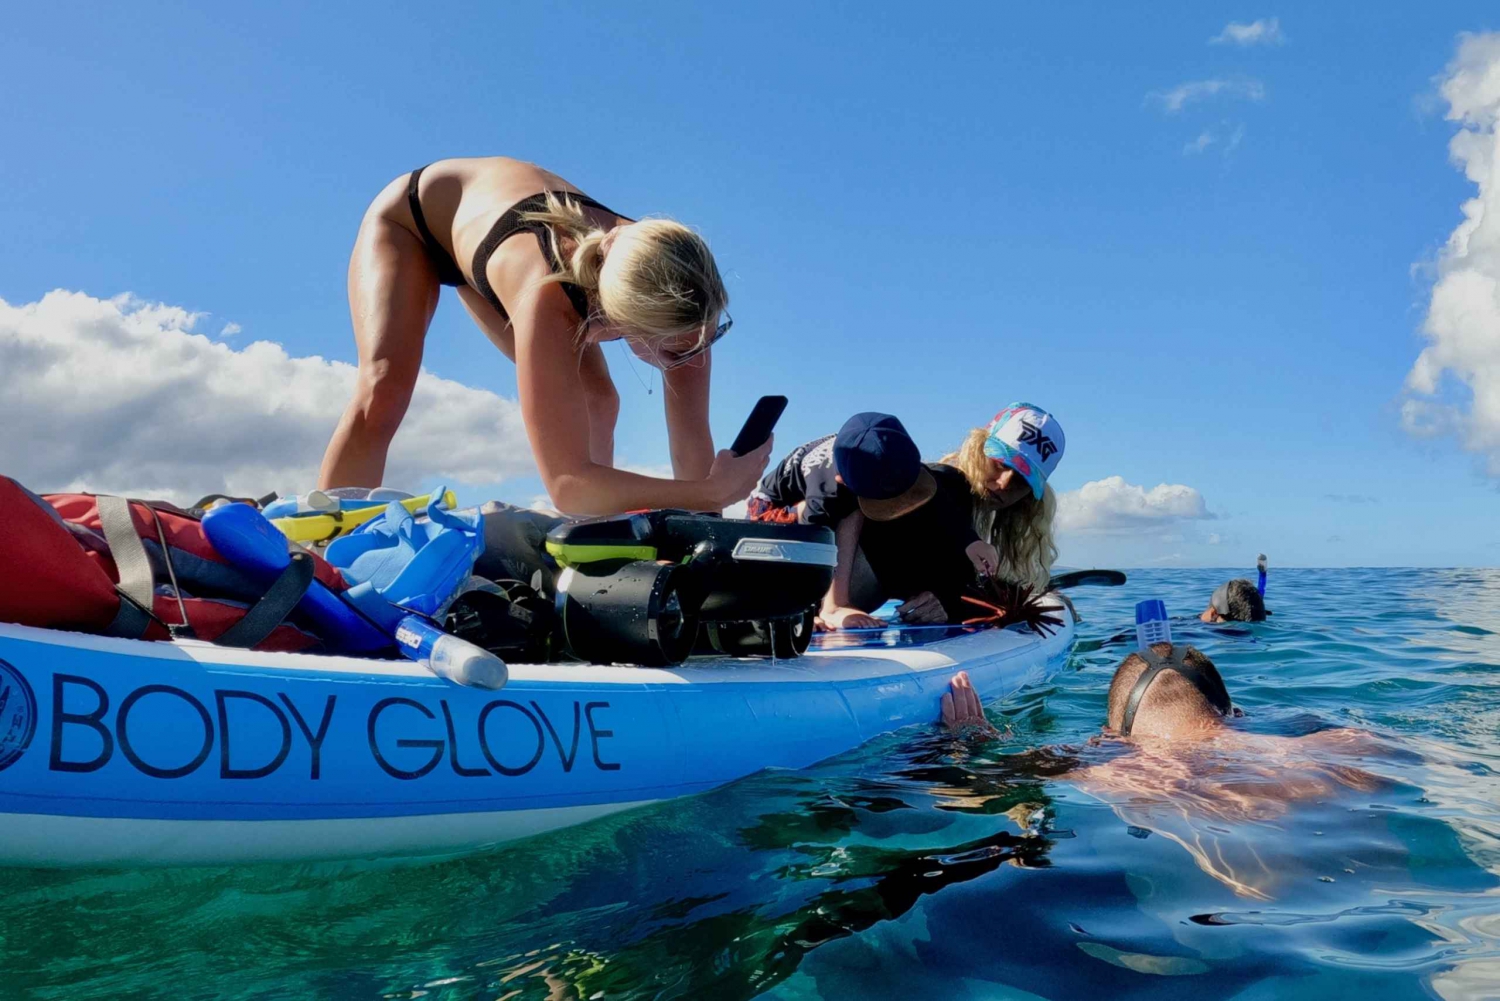 South Maui: Snorkeling Tour for Non-Swimmers in Kihei